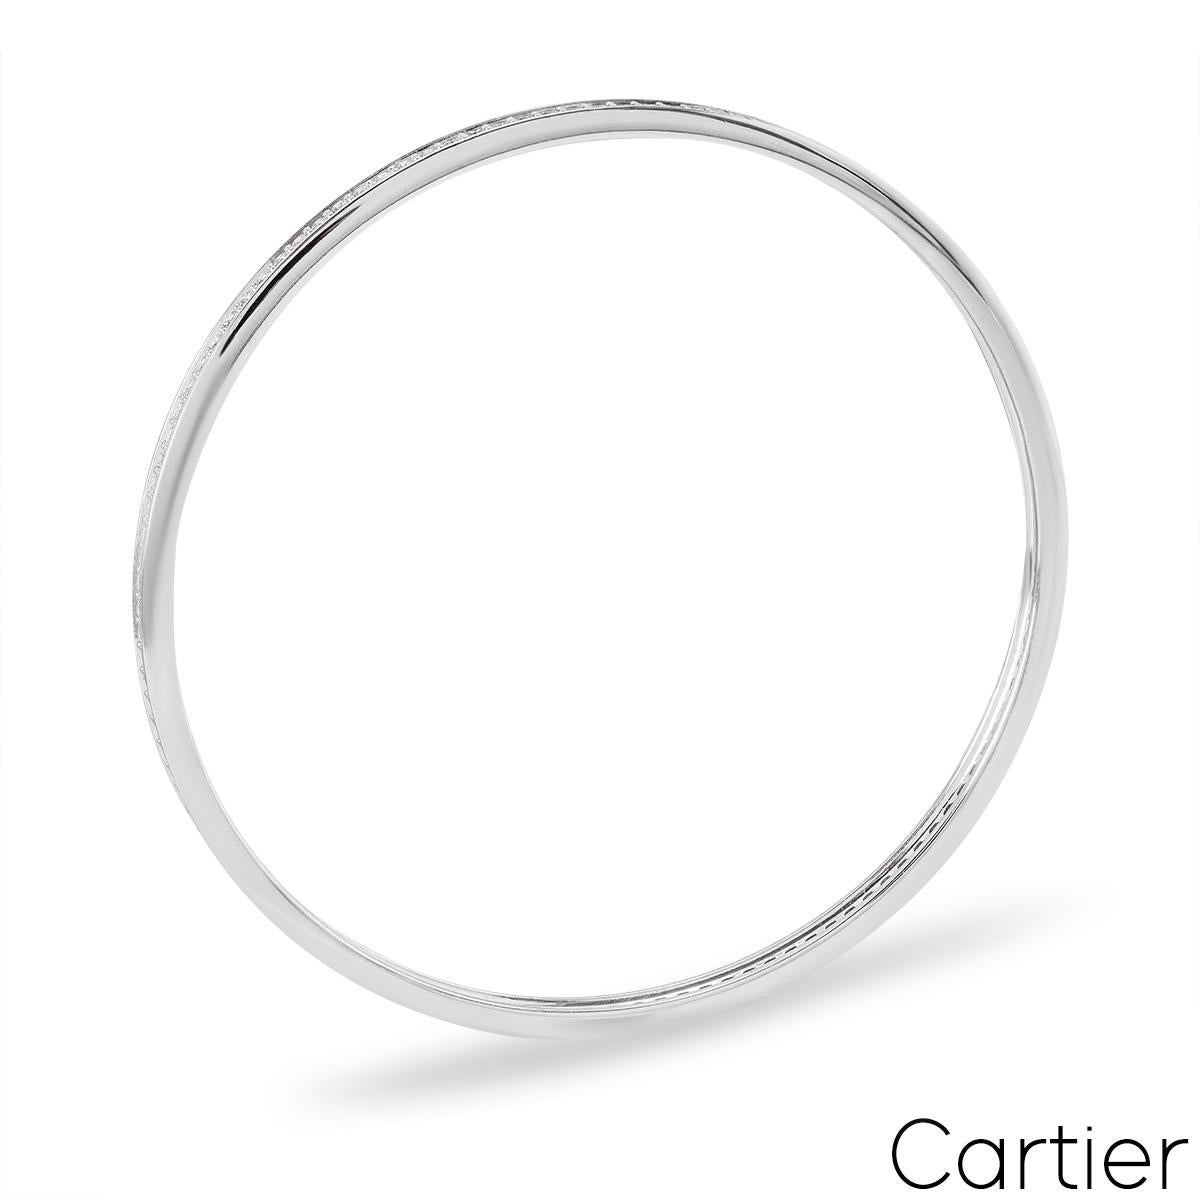 A stunning 18k white gold Cartier diamond bangle. The bangle comprises of a full pave set with 116 round brilliant cut diamonds with a total weight of approximately 2.90ct, F colour and VS clarity. The bangle fits a wrist up to 20.25cm and has a